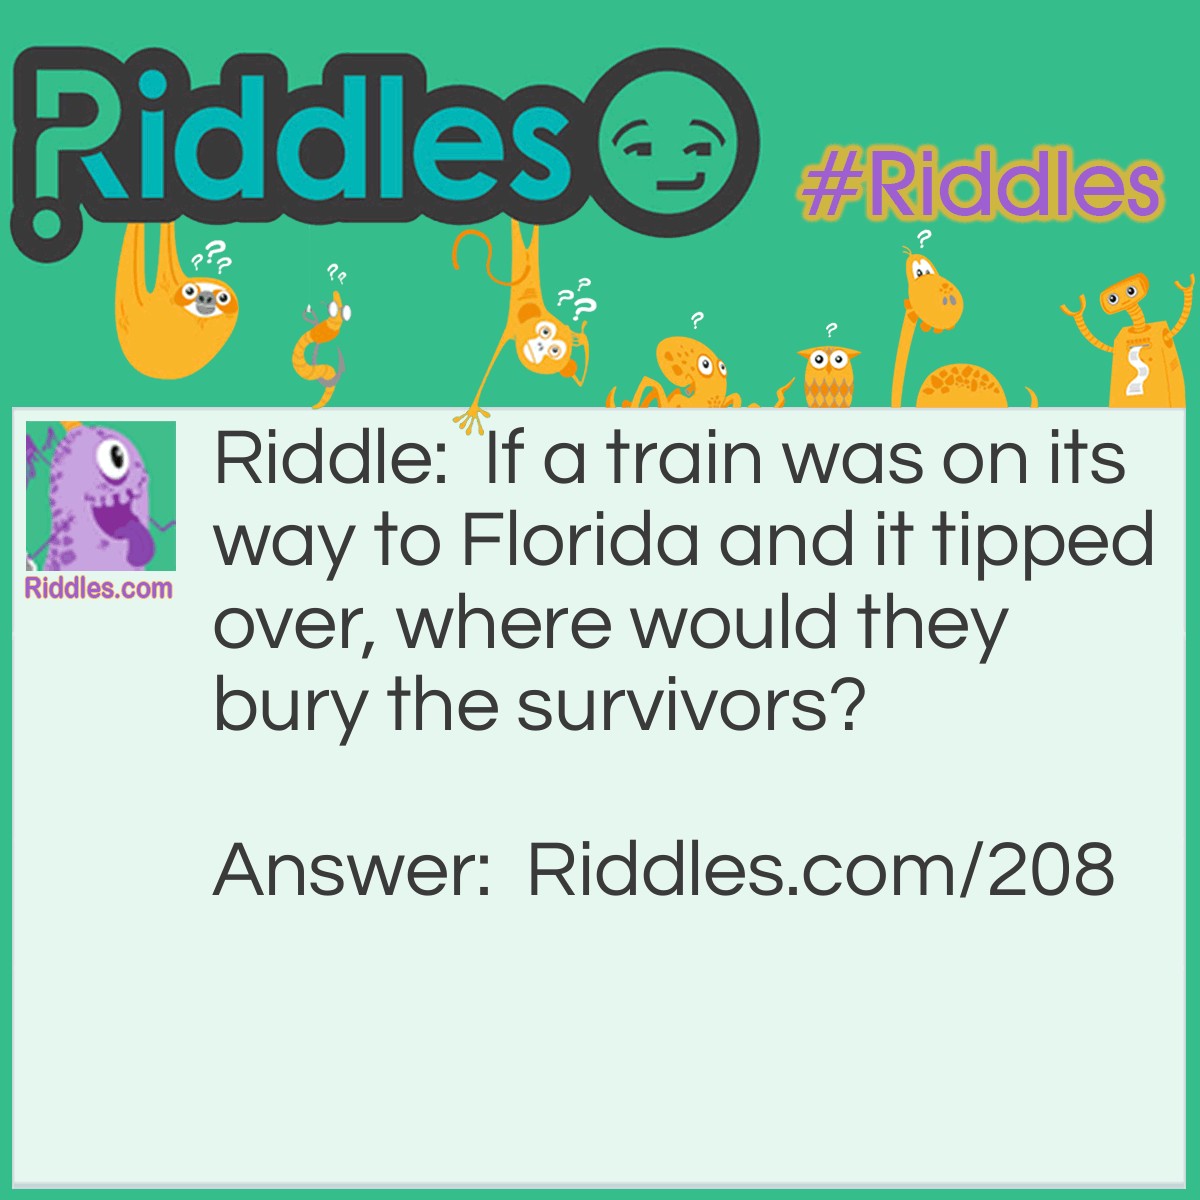 Riddle: If a train was on its way to Florida and it tipped over, where would they bury the survivors? Answer: They wouldn't need to, the survivors are still alive!